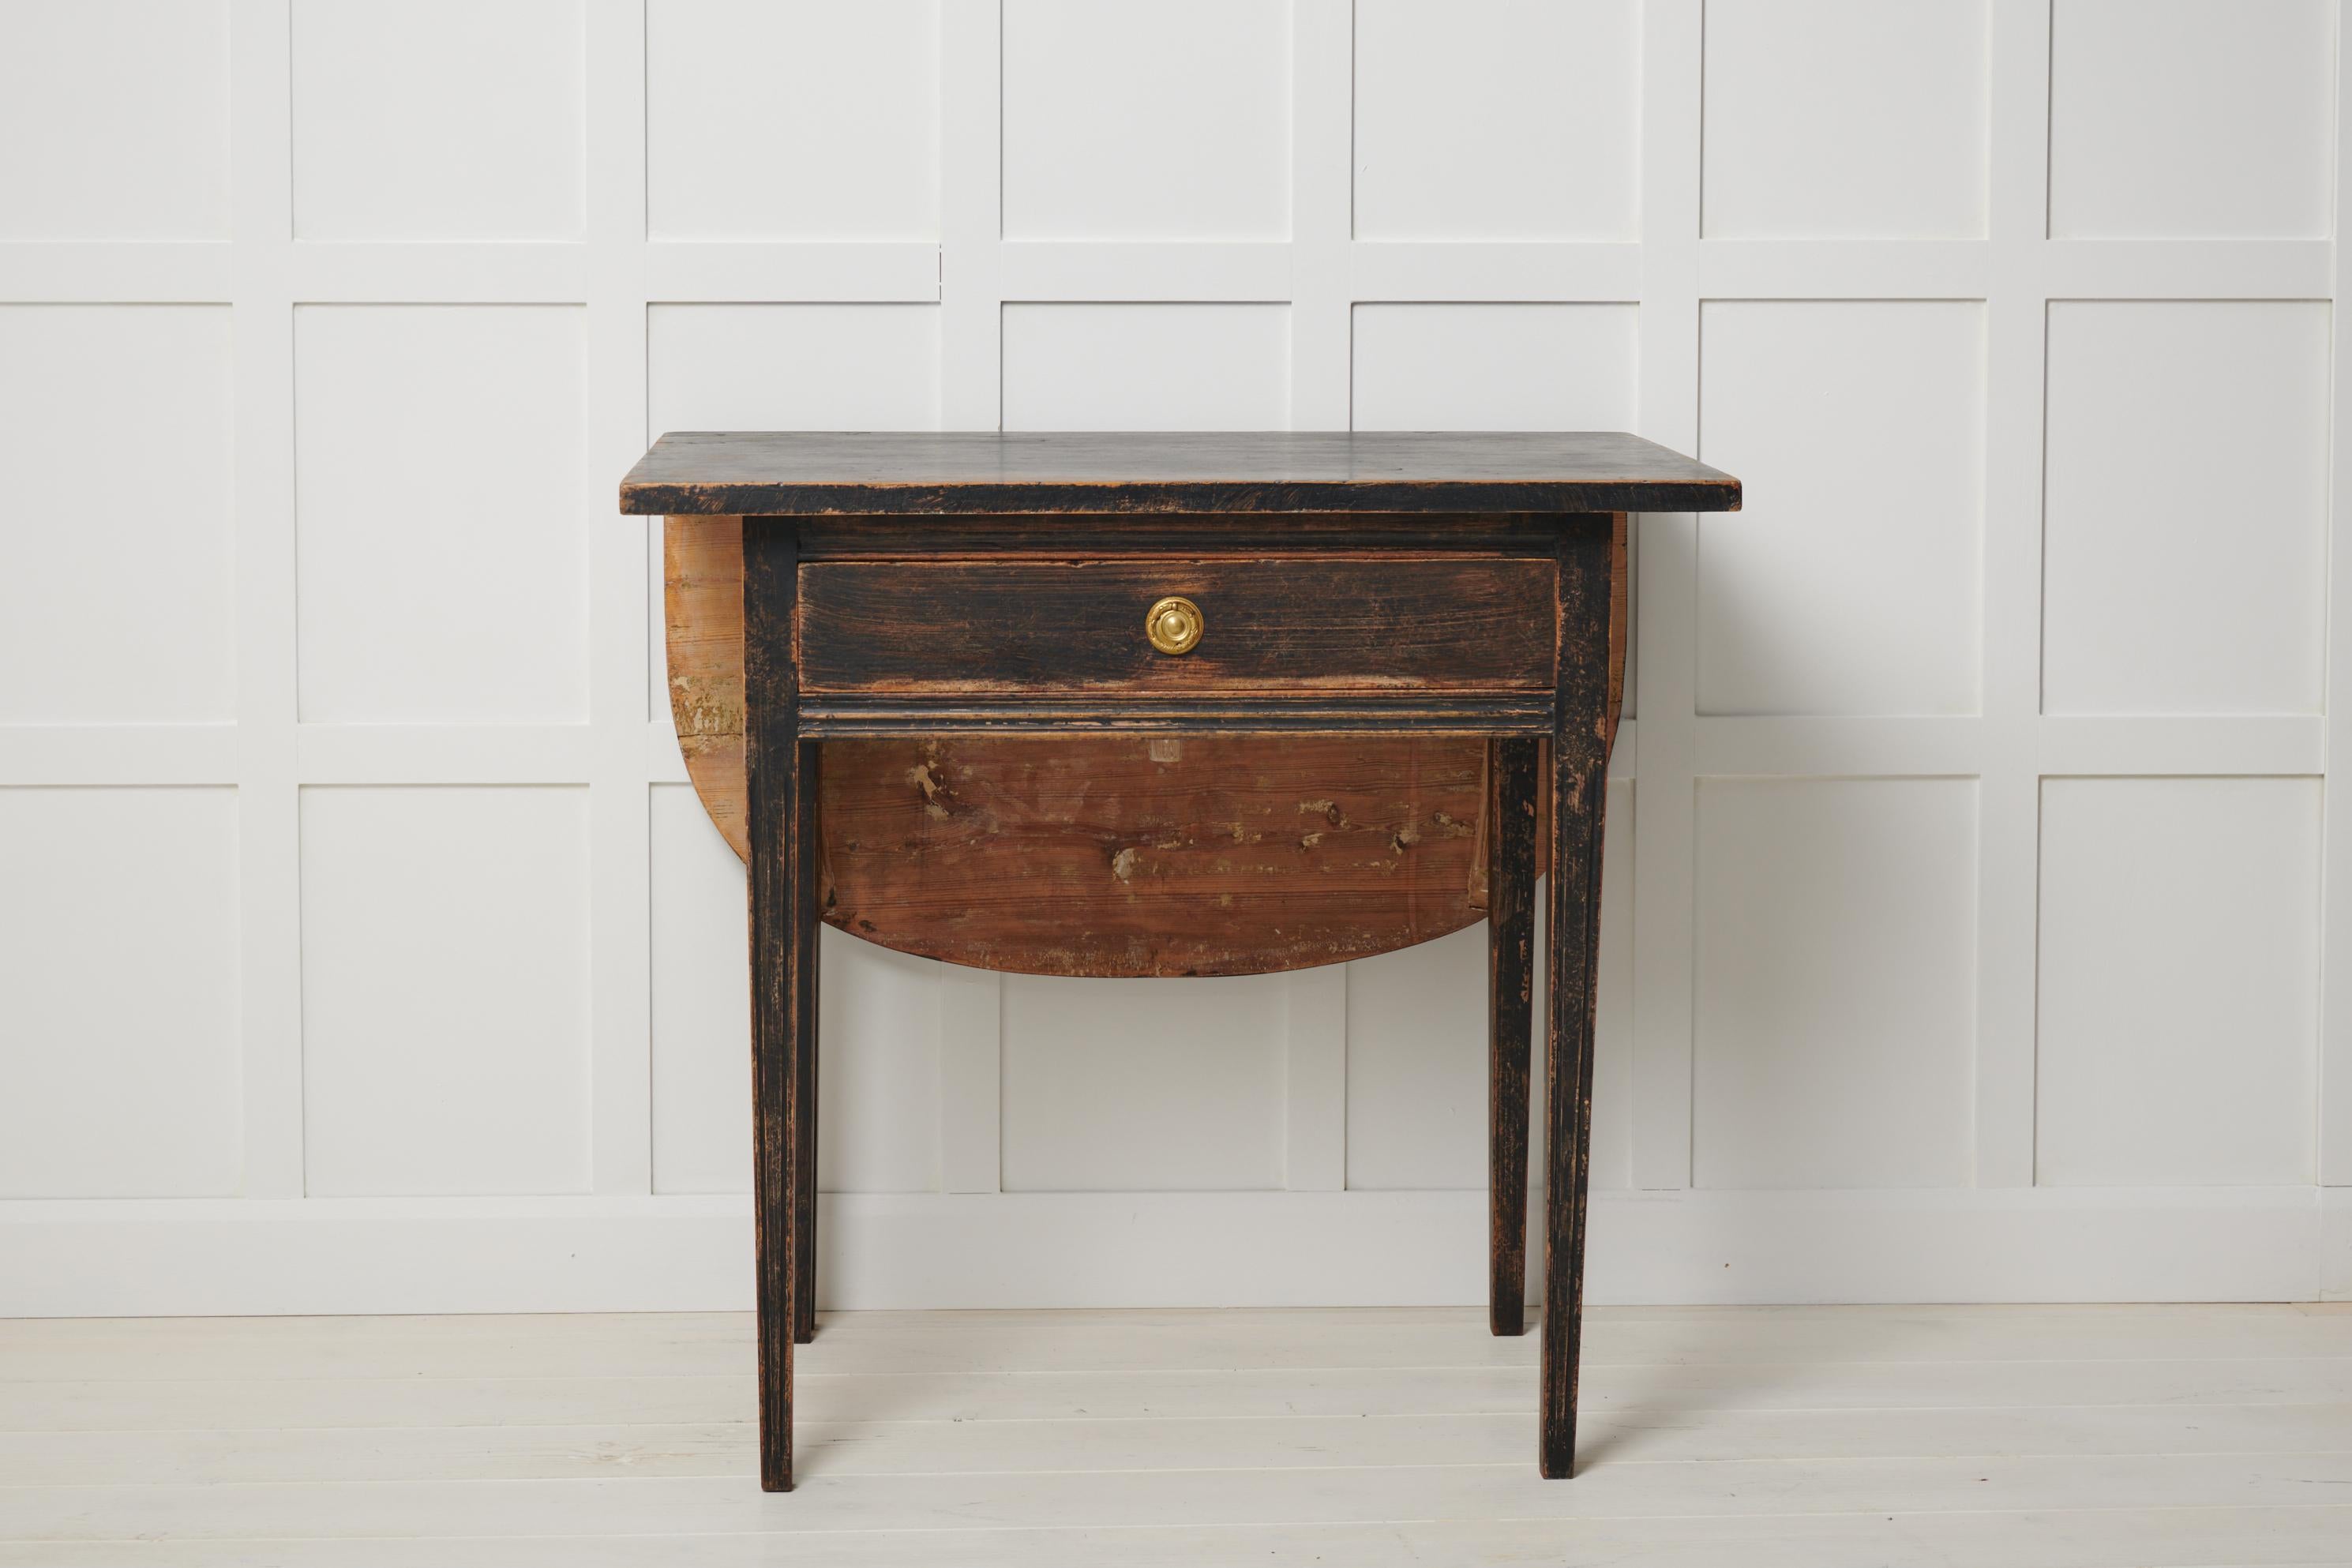 Small antique black table in gustavian style from Sweden. The table is a genuine Swedish country house furniture from around 1820. The table has a rounded leaf table top on the back of the table and straight tapered legs decorated with flutes. The